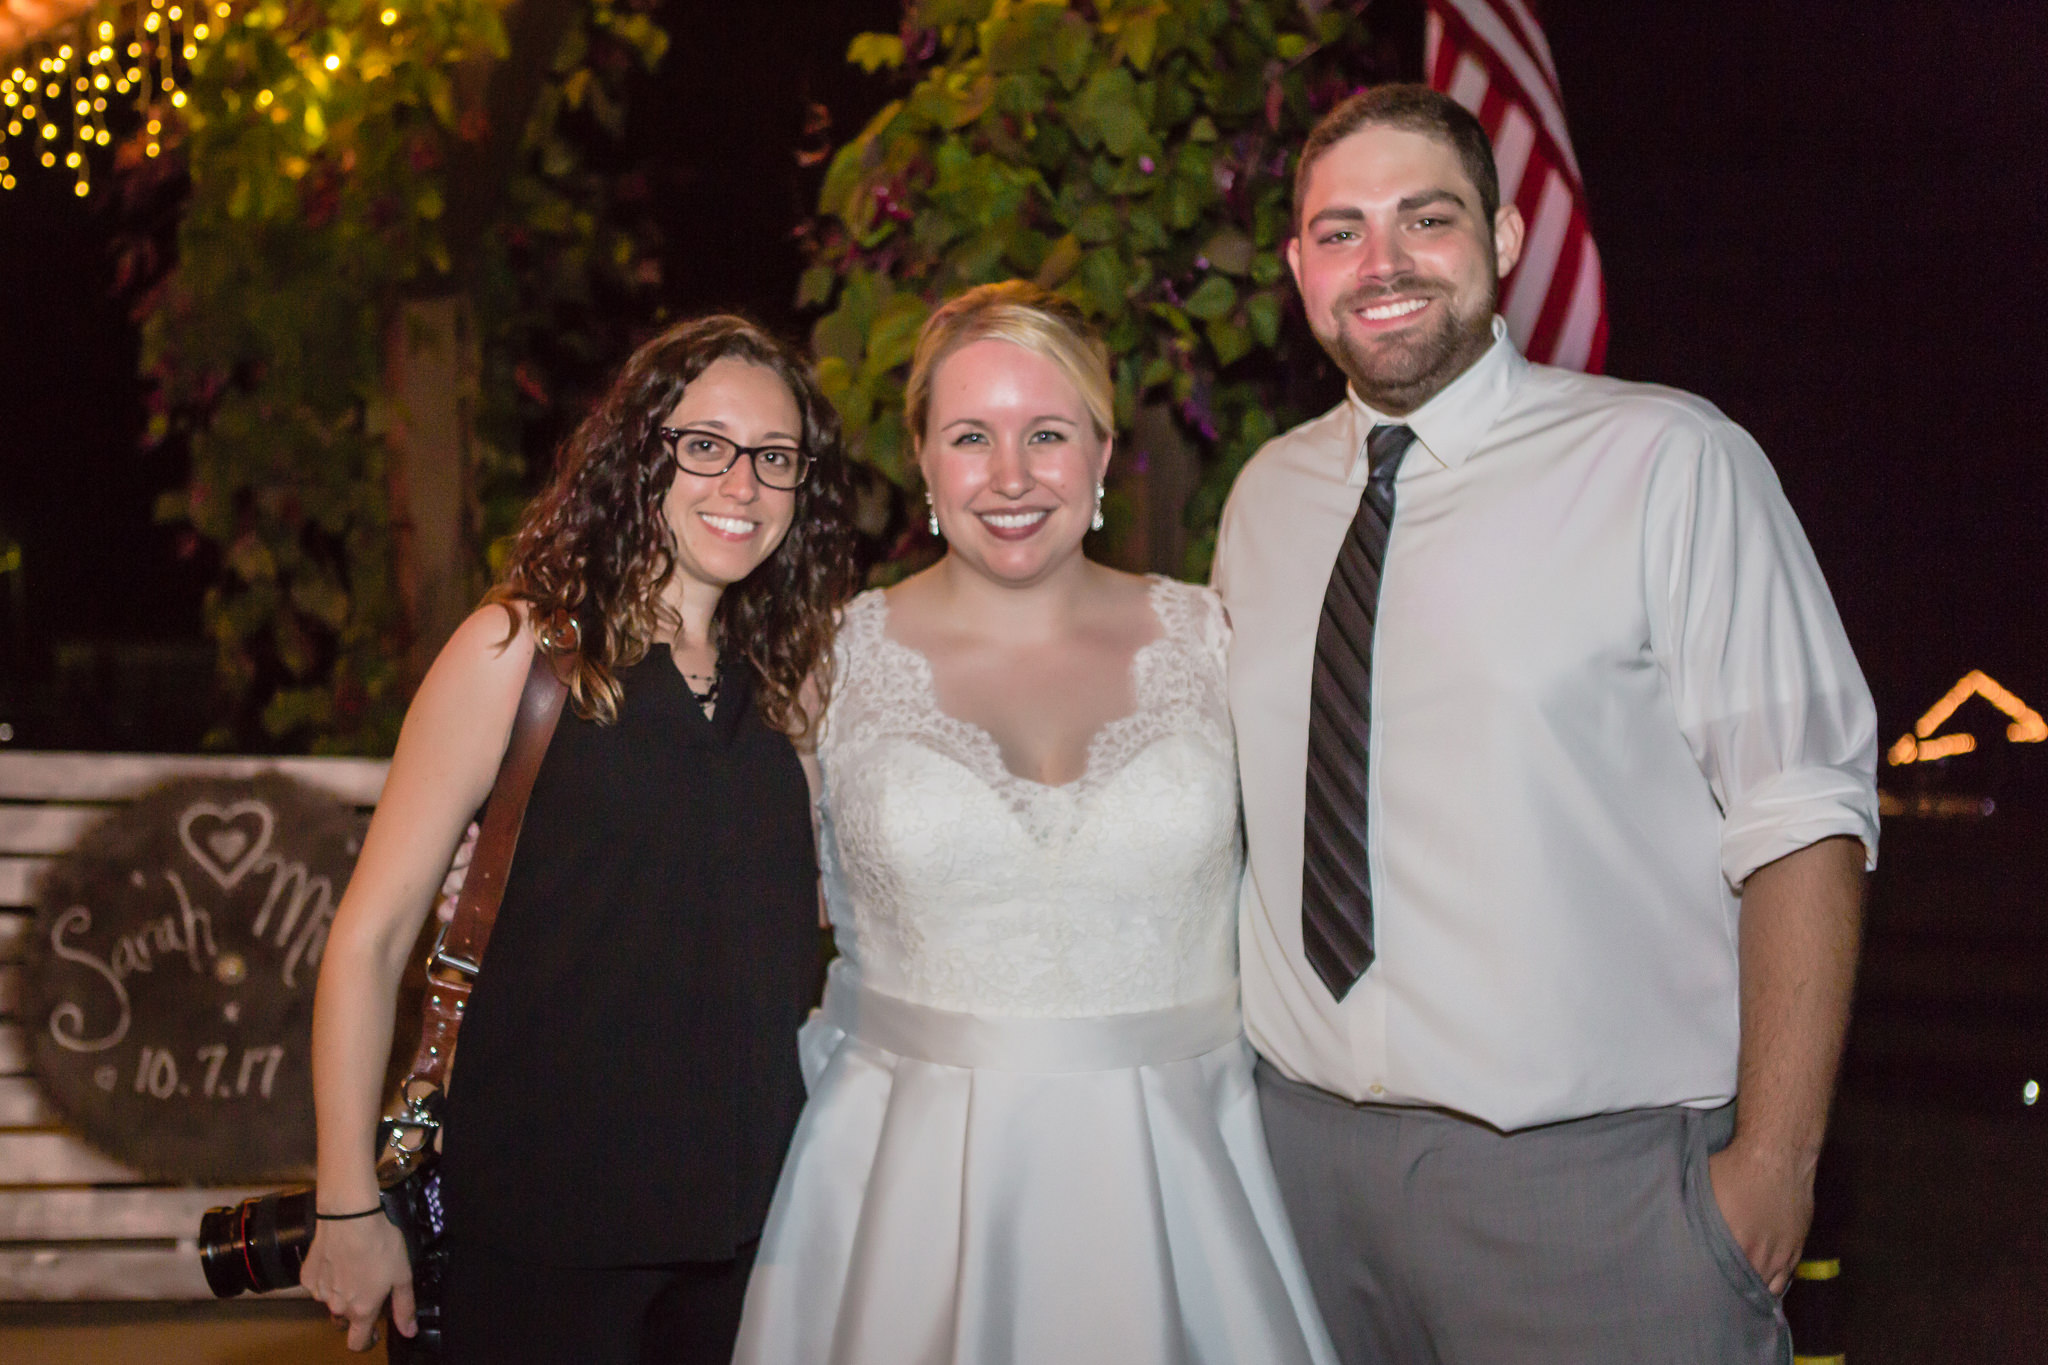 Bride and groom pose with their wedding photographer Kristen Vota at the Barn at Soergel Hollow